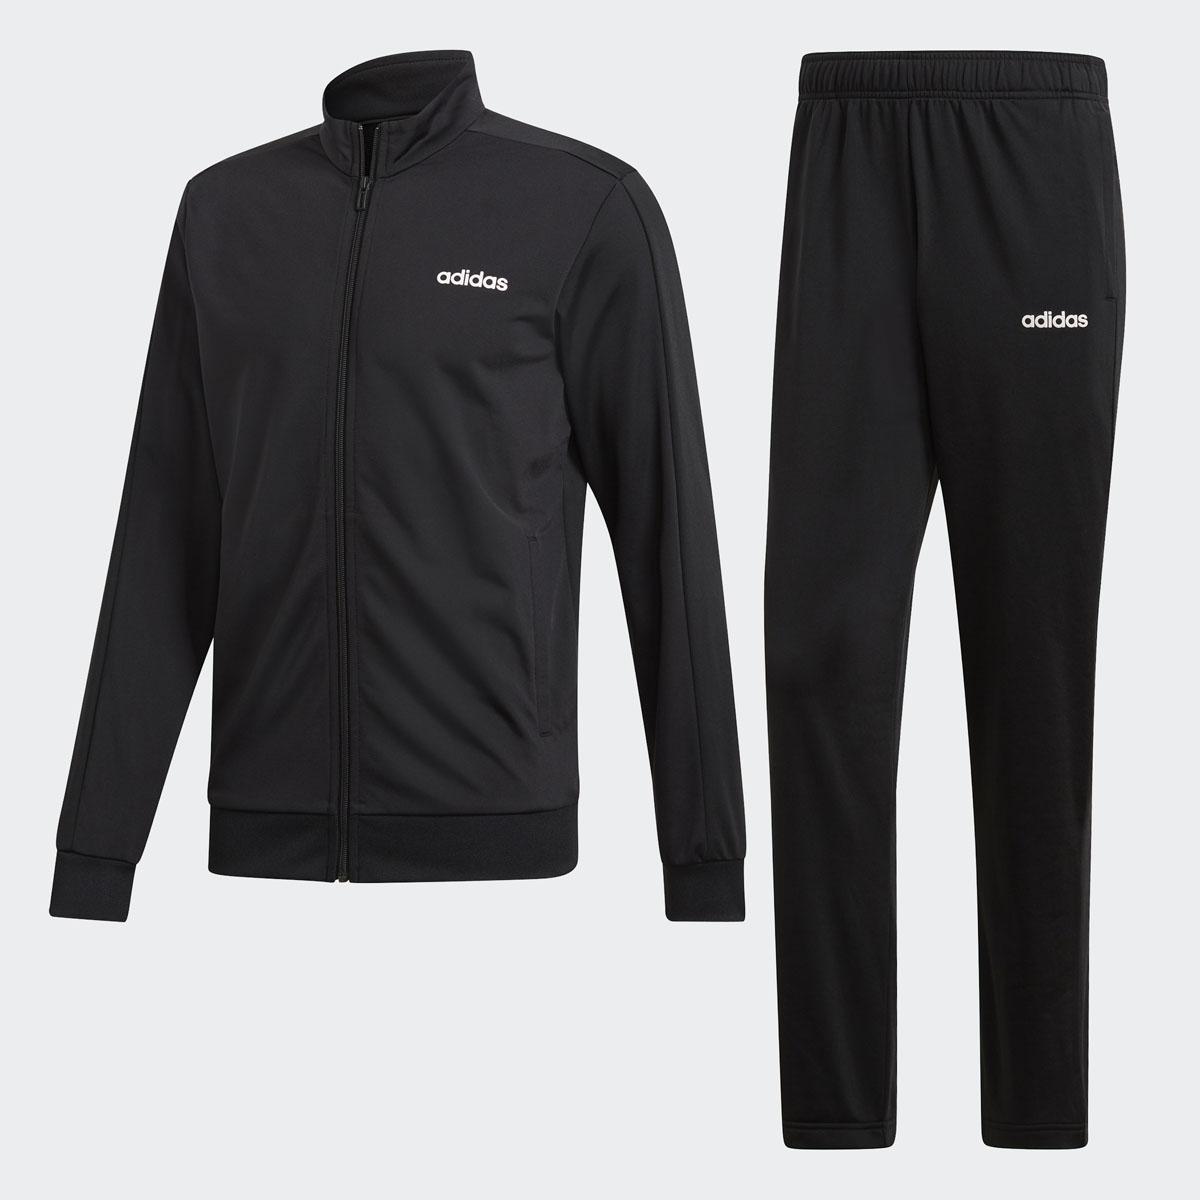 adidas Mens Essentials Basics Track Suit for $22.95 Shipped